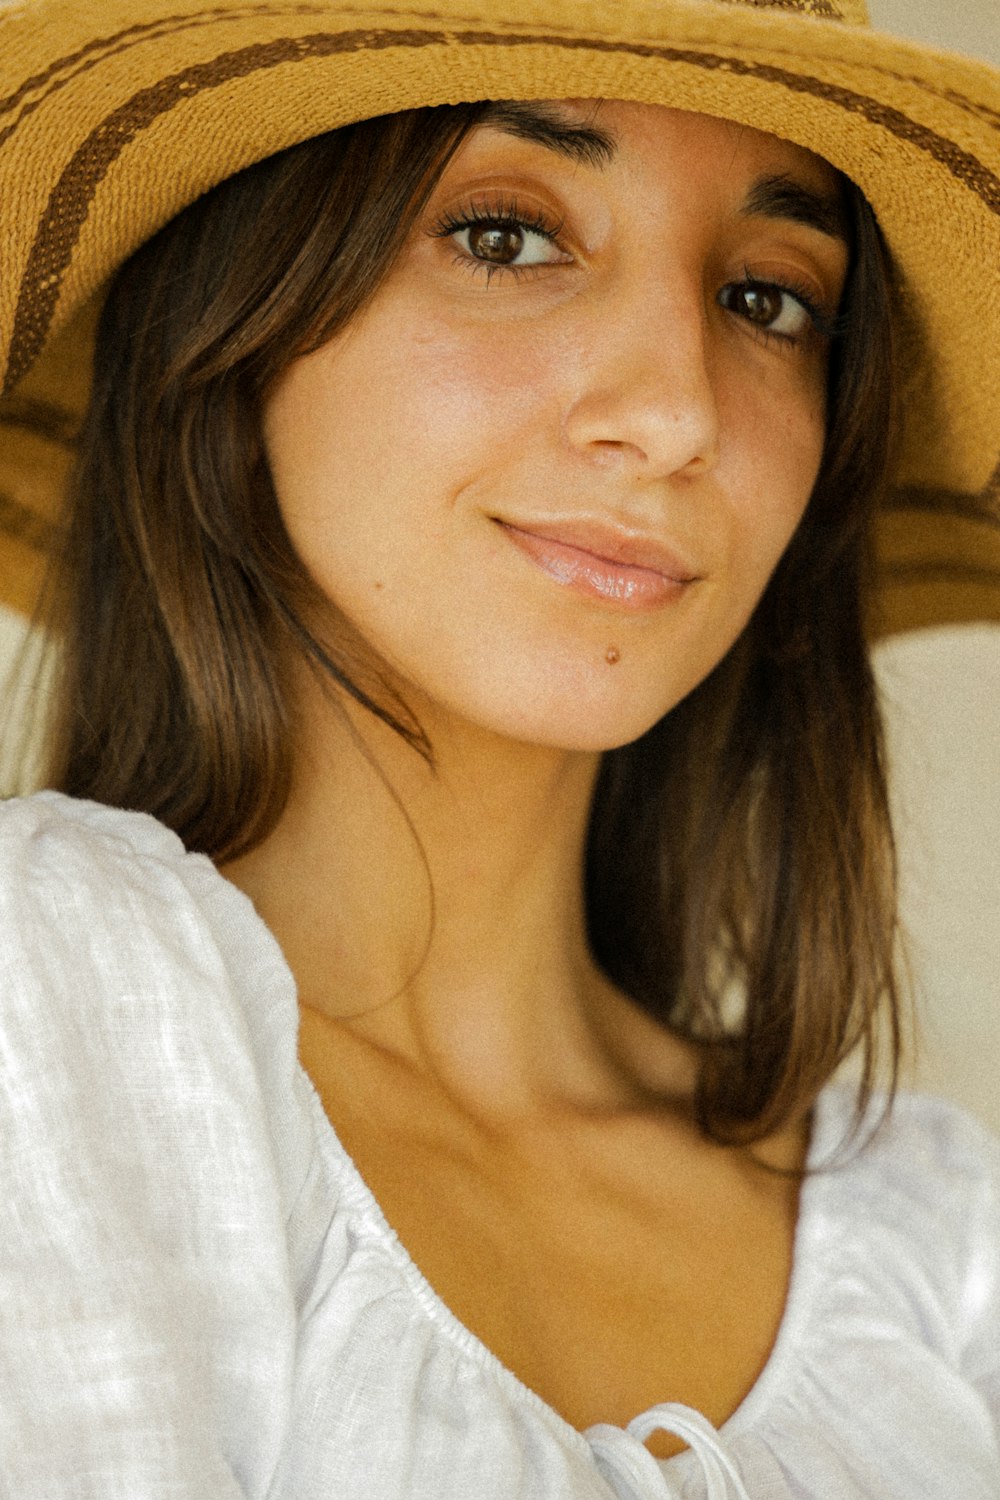 woman in white shirt smiling